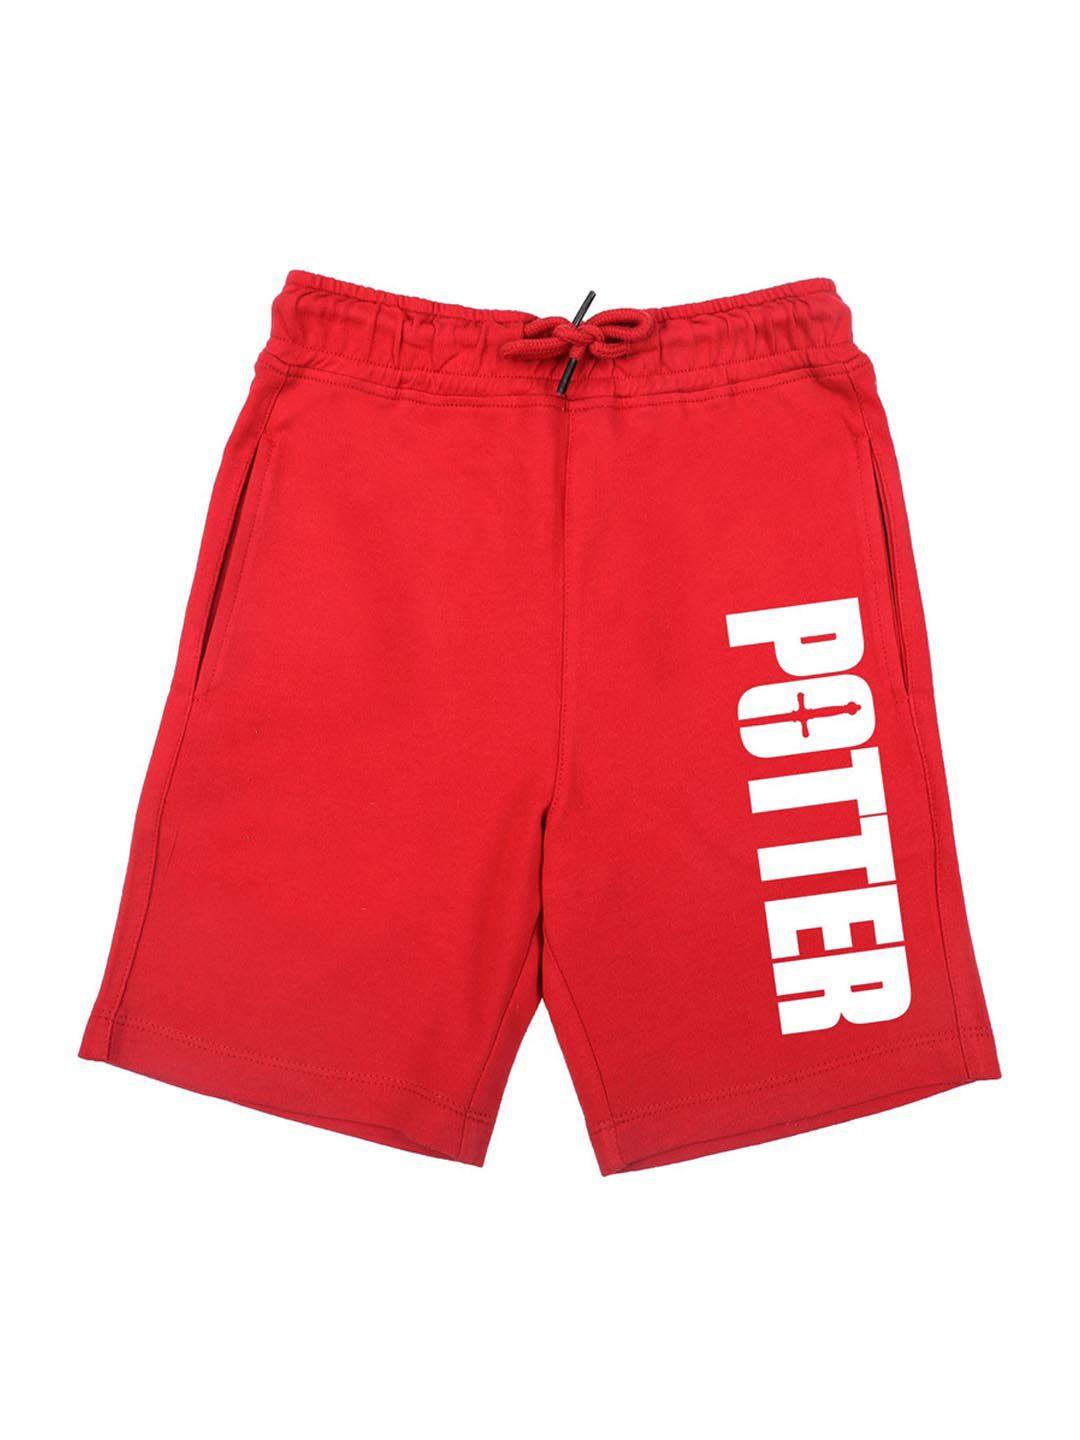 harry potter by wear your mind boys red typography printed harry potter shorts